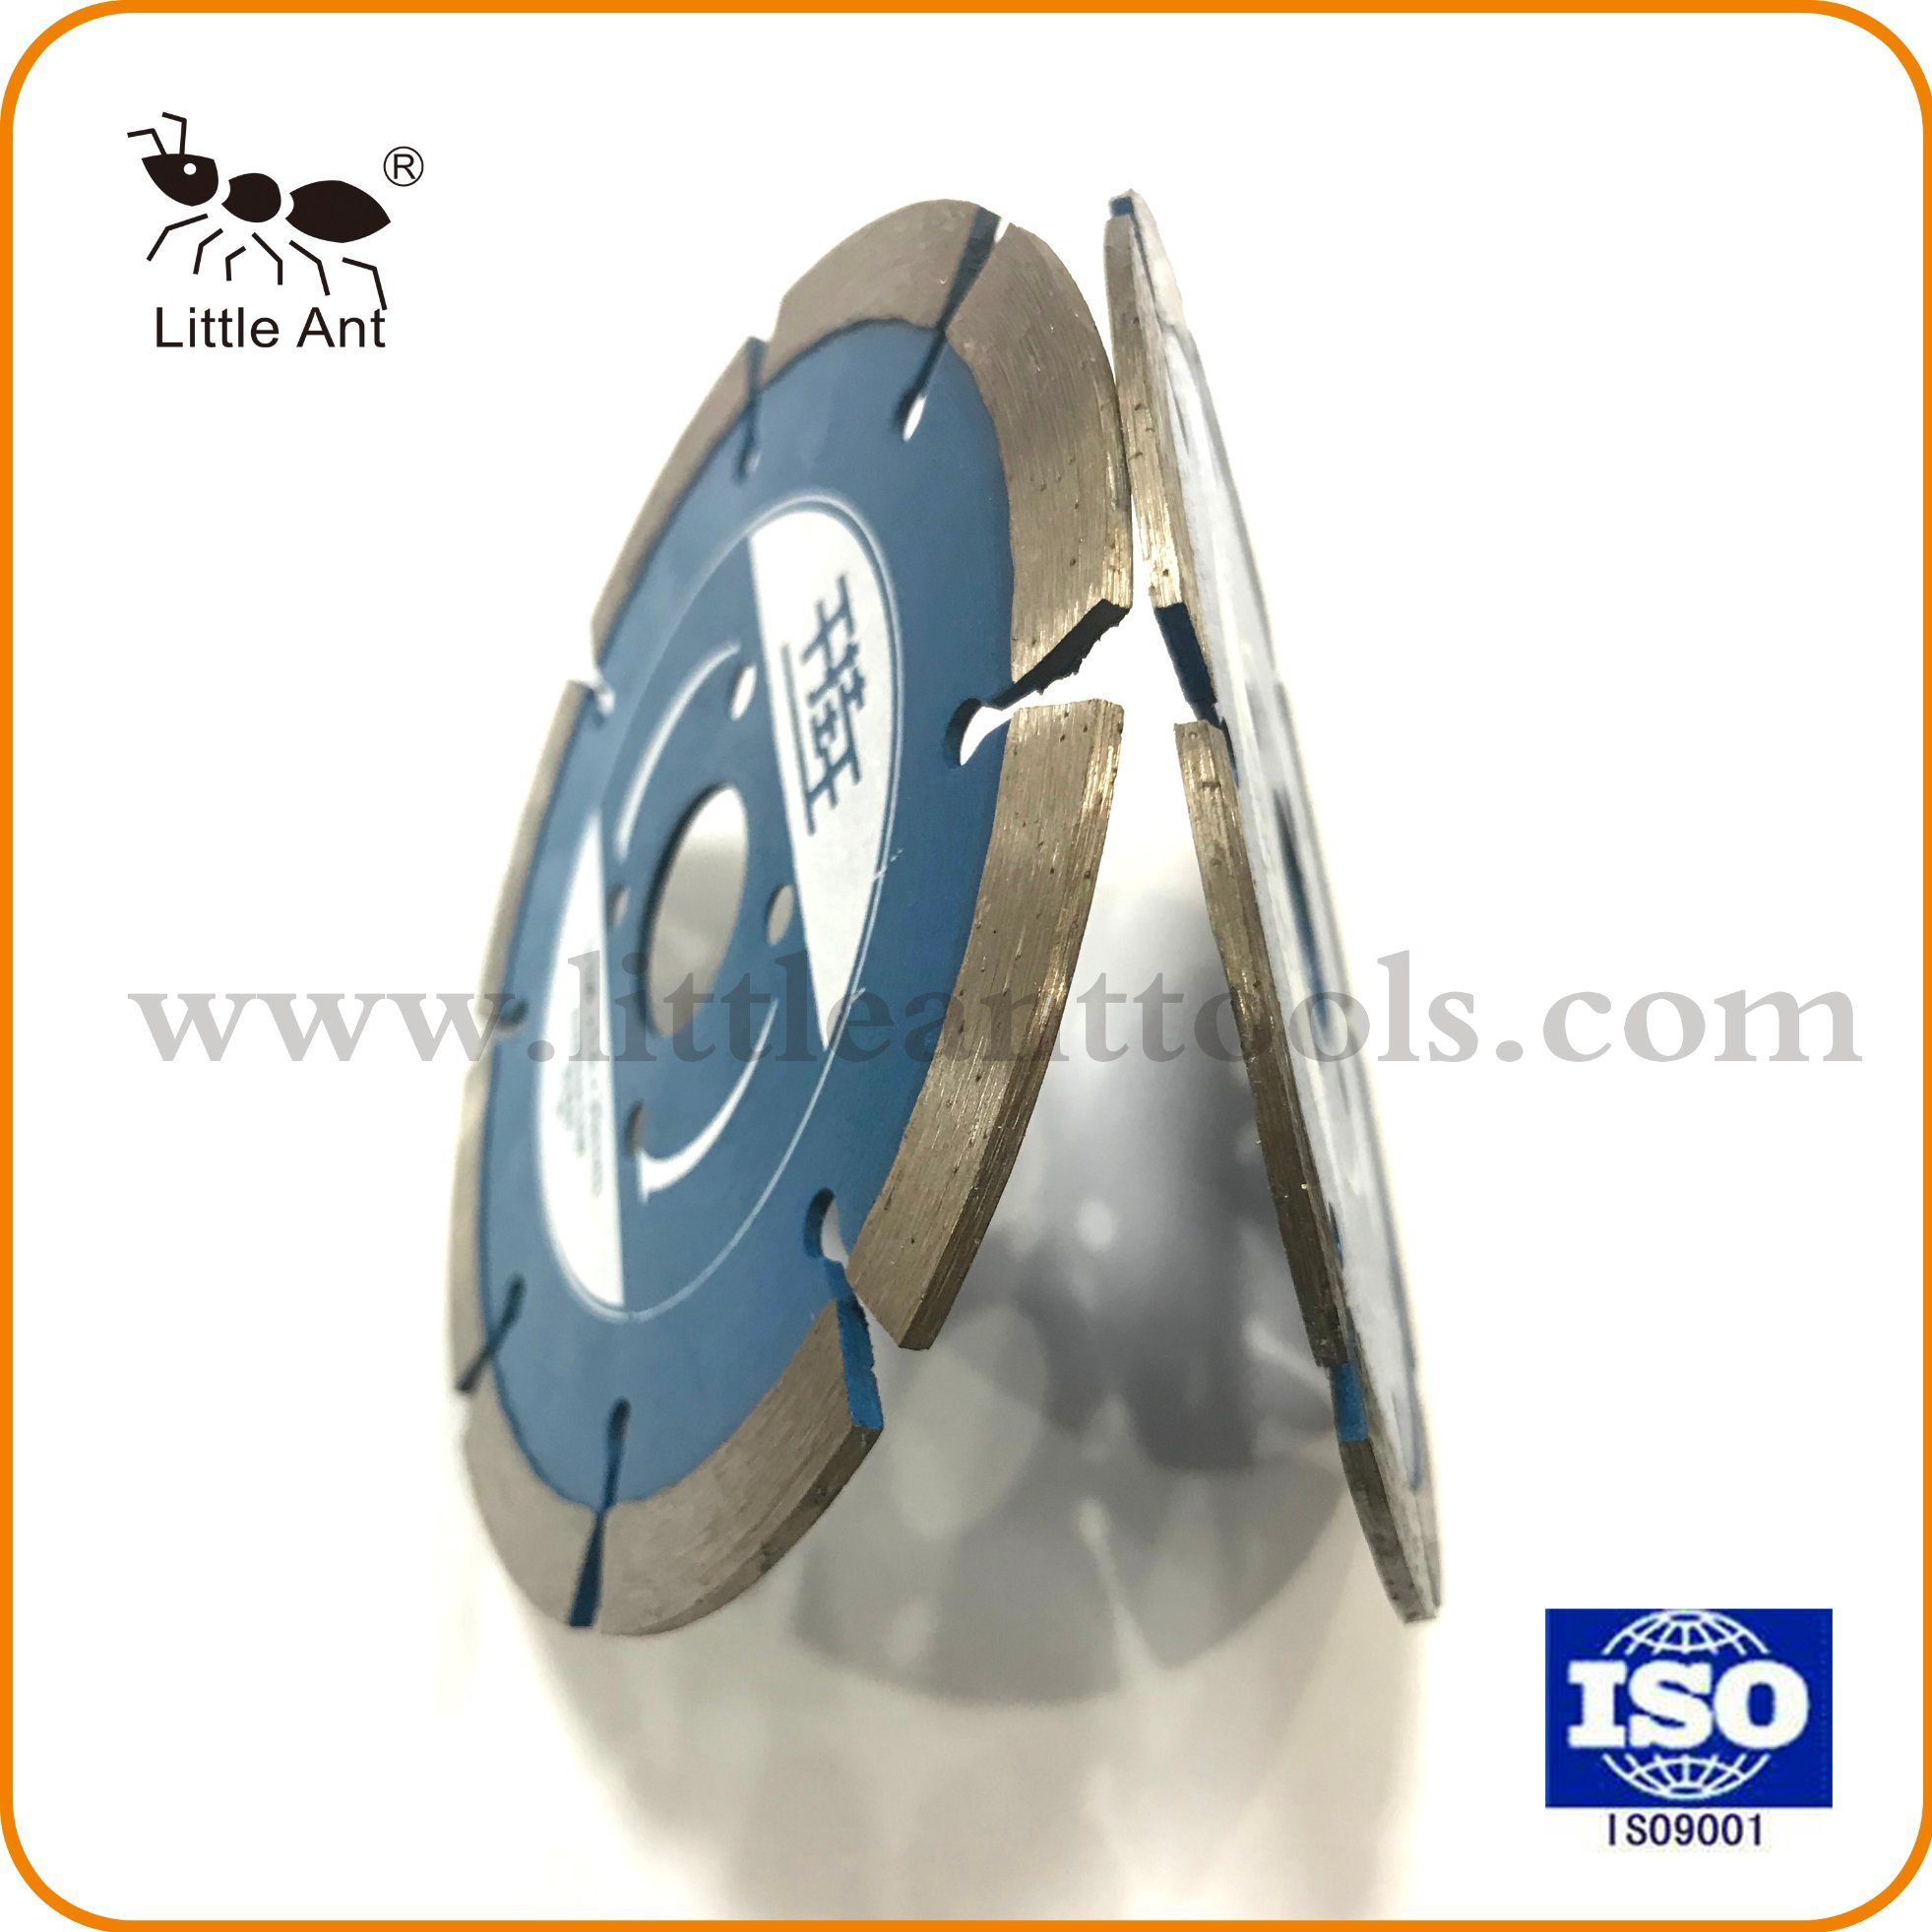 Little Ant Circular Diamond Saw Blade for Cutting Marble and Stone